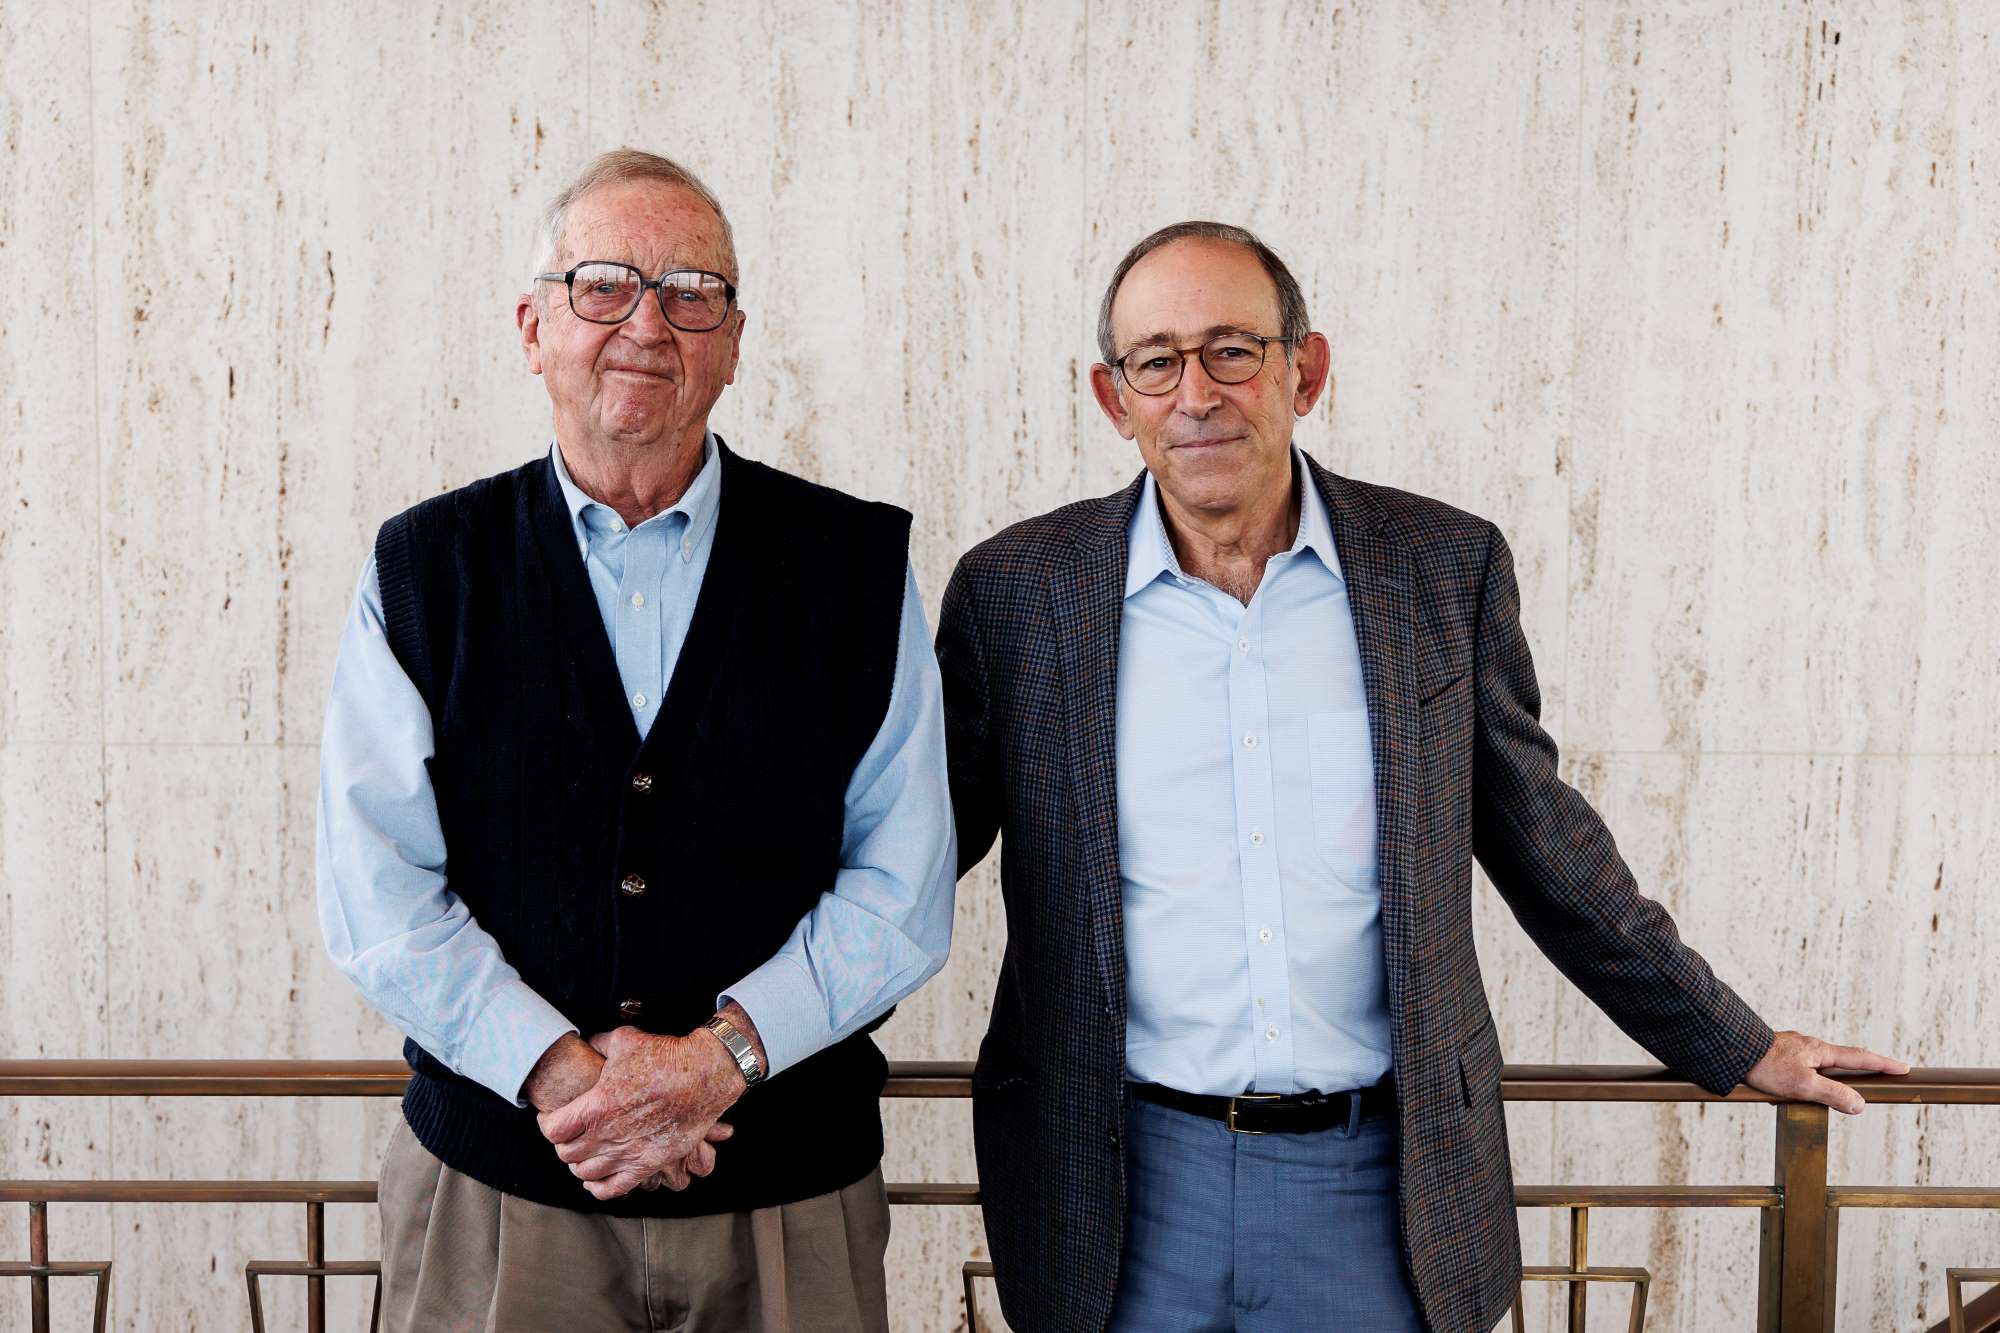 Professor William L. Luyben and chemical engineering alum Mike Zisman